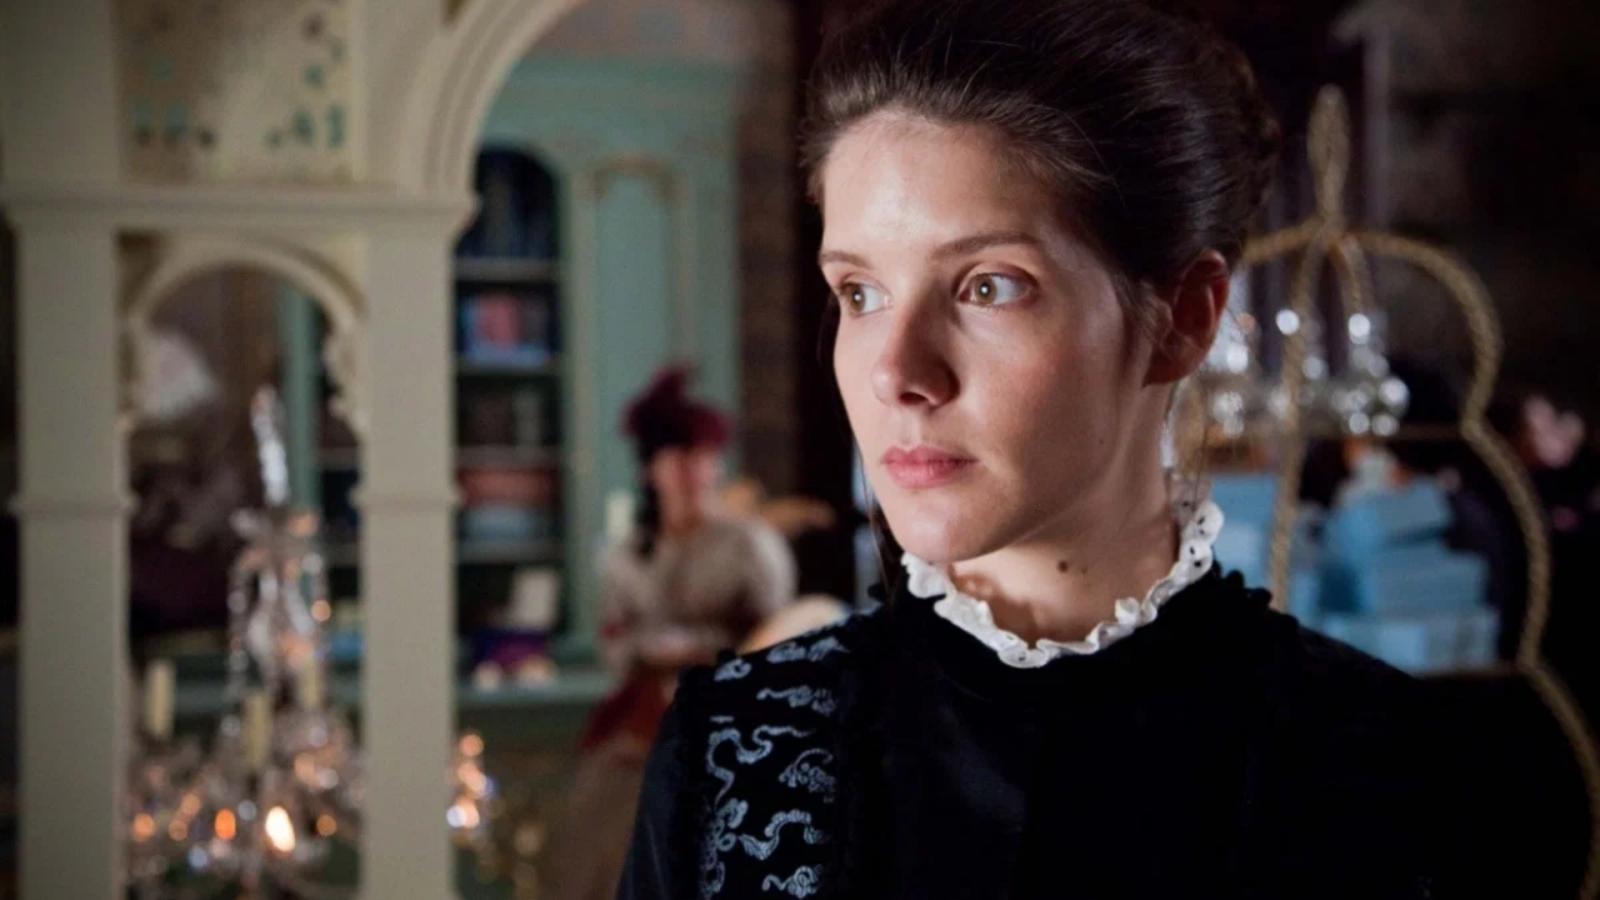 10 Light-Hearted Period Dramas to Watch Instead of Outlander - image 2